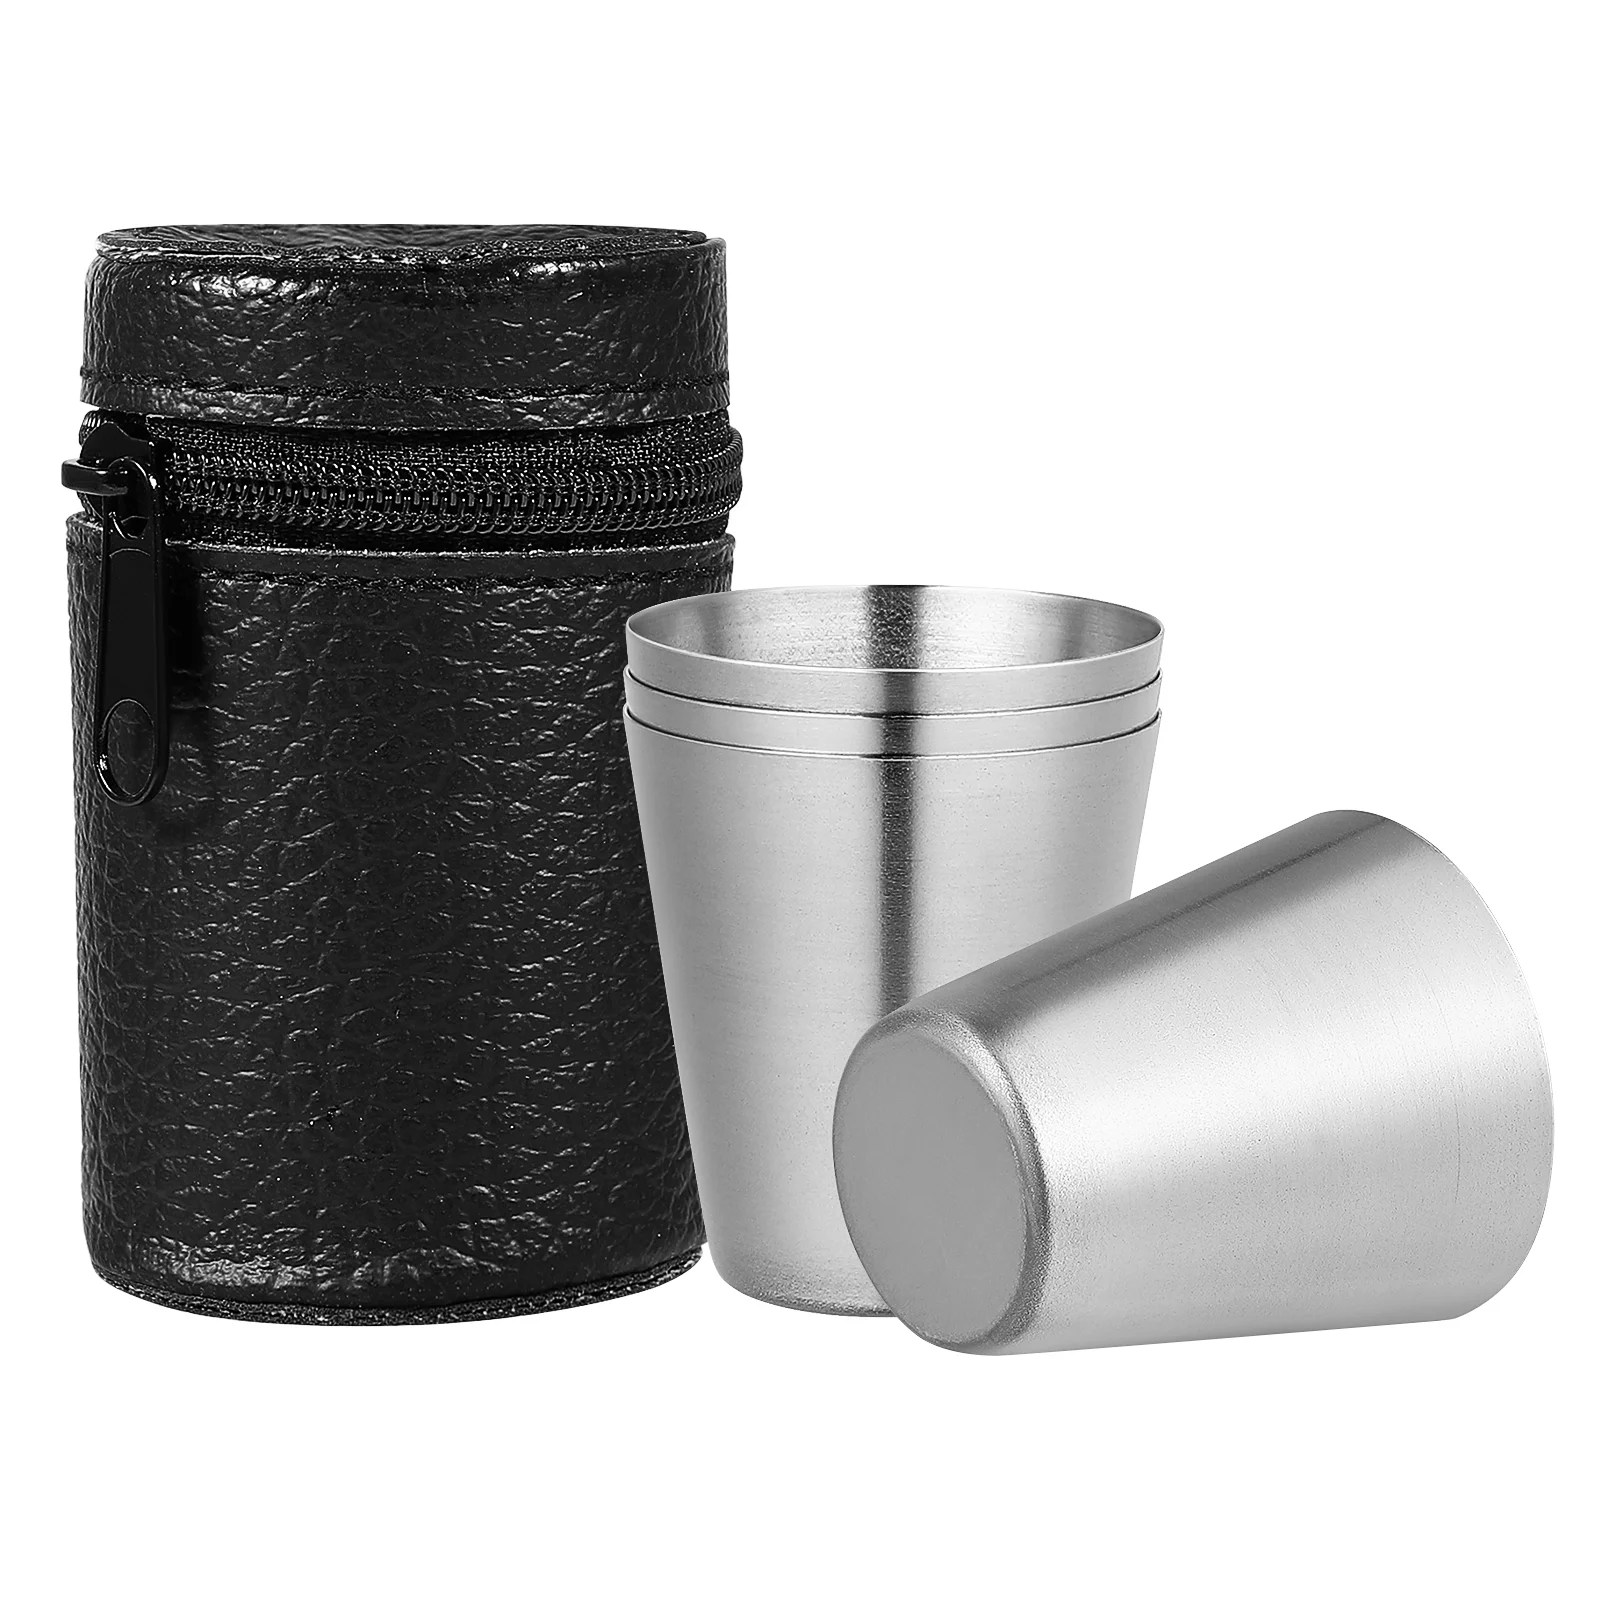 

Stainless Steel Drinking Glasses Bulk Coffee Tumblers Espresso Shot Aluminum Cups Small Pint Set